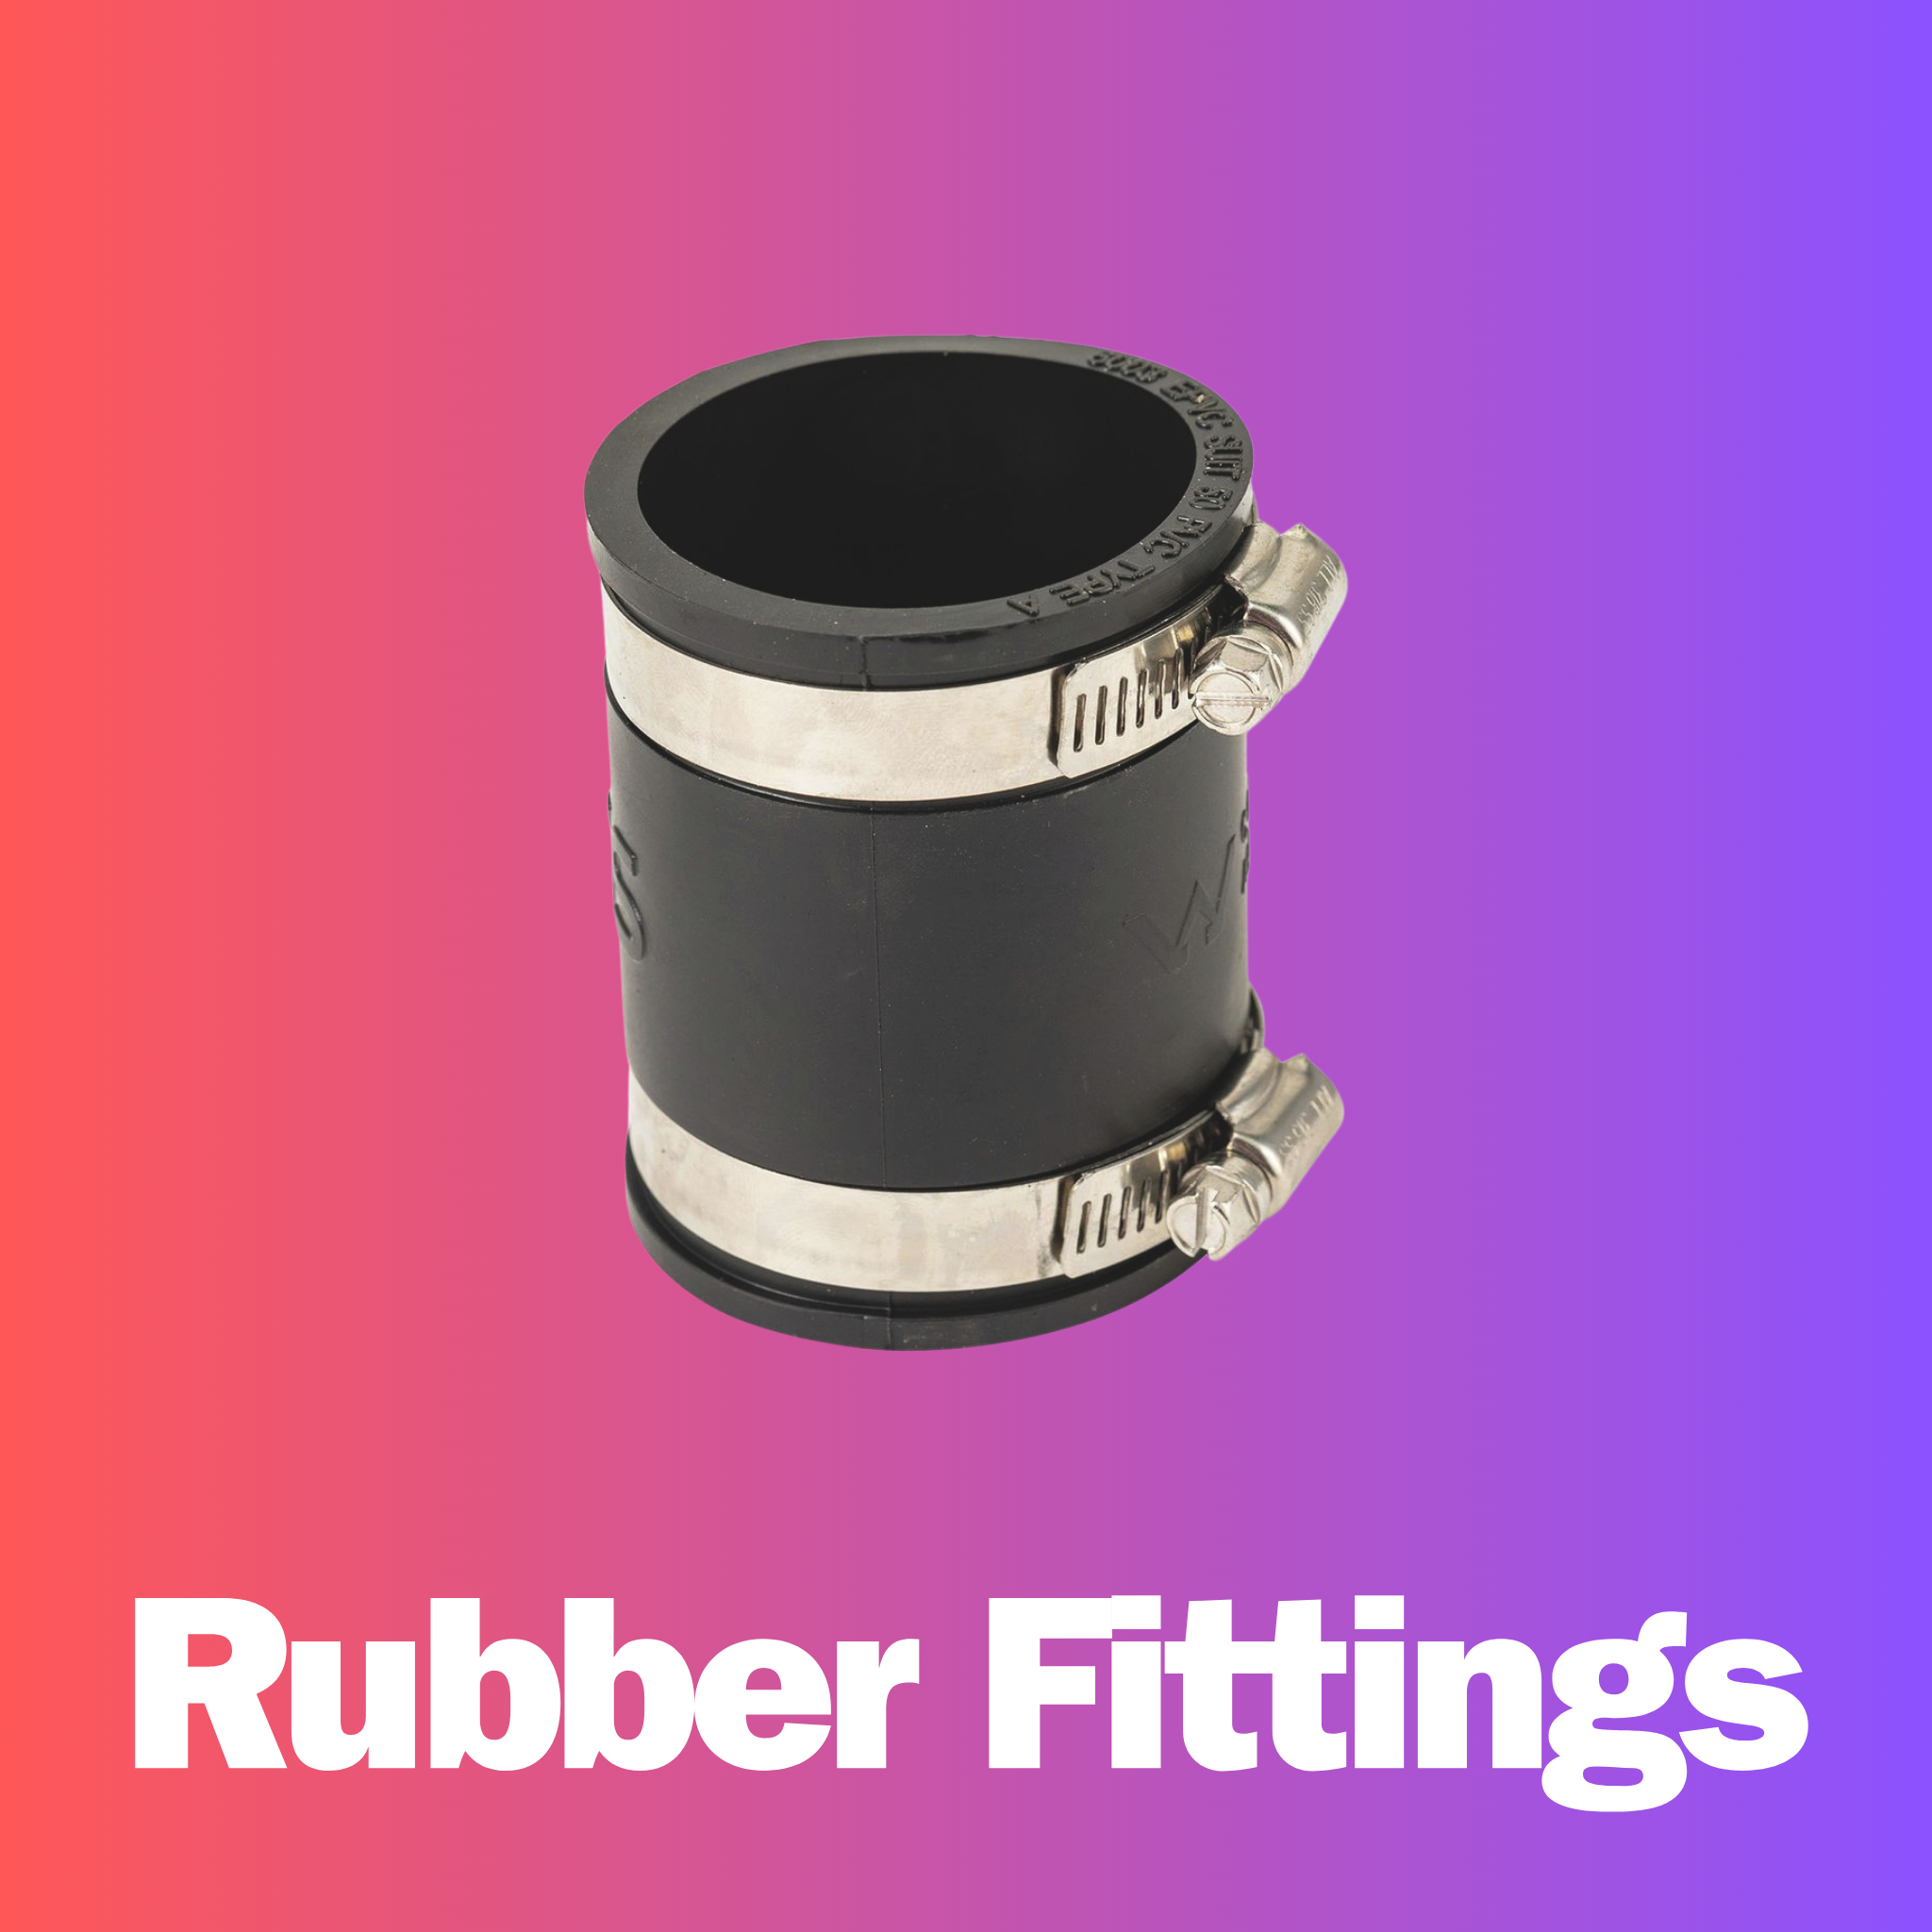 Rubber Fittings